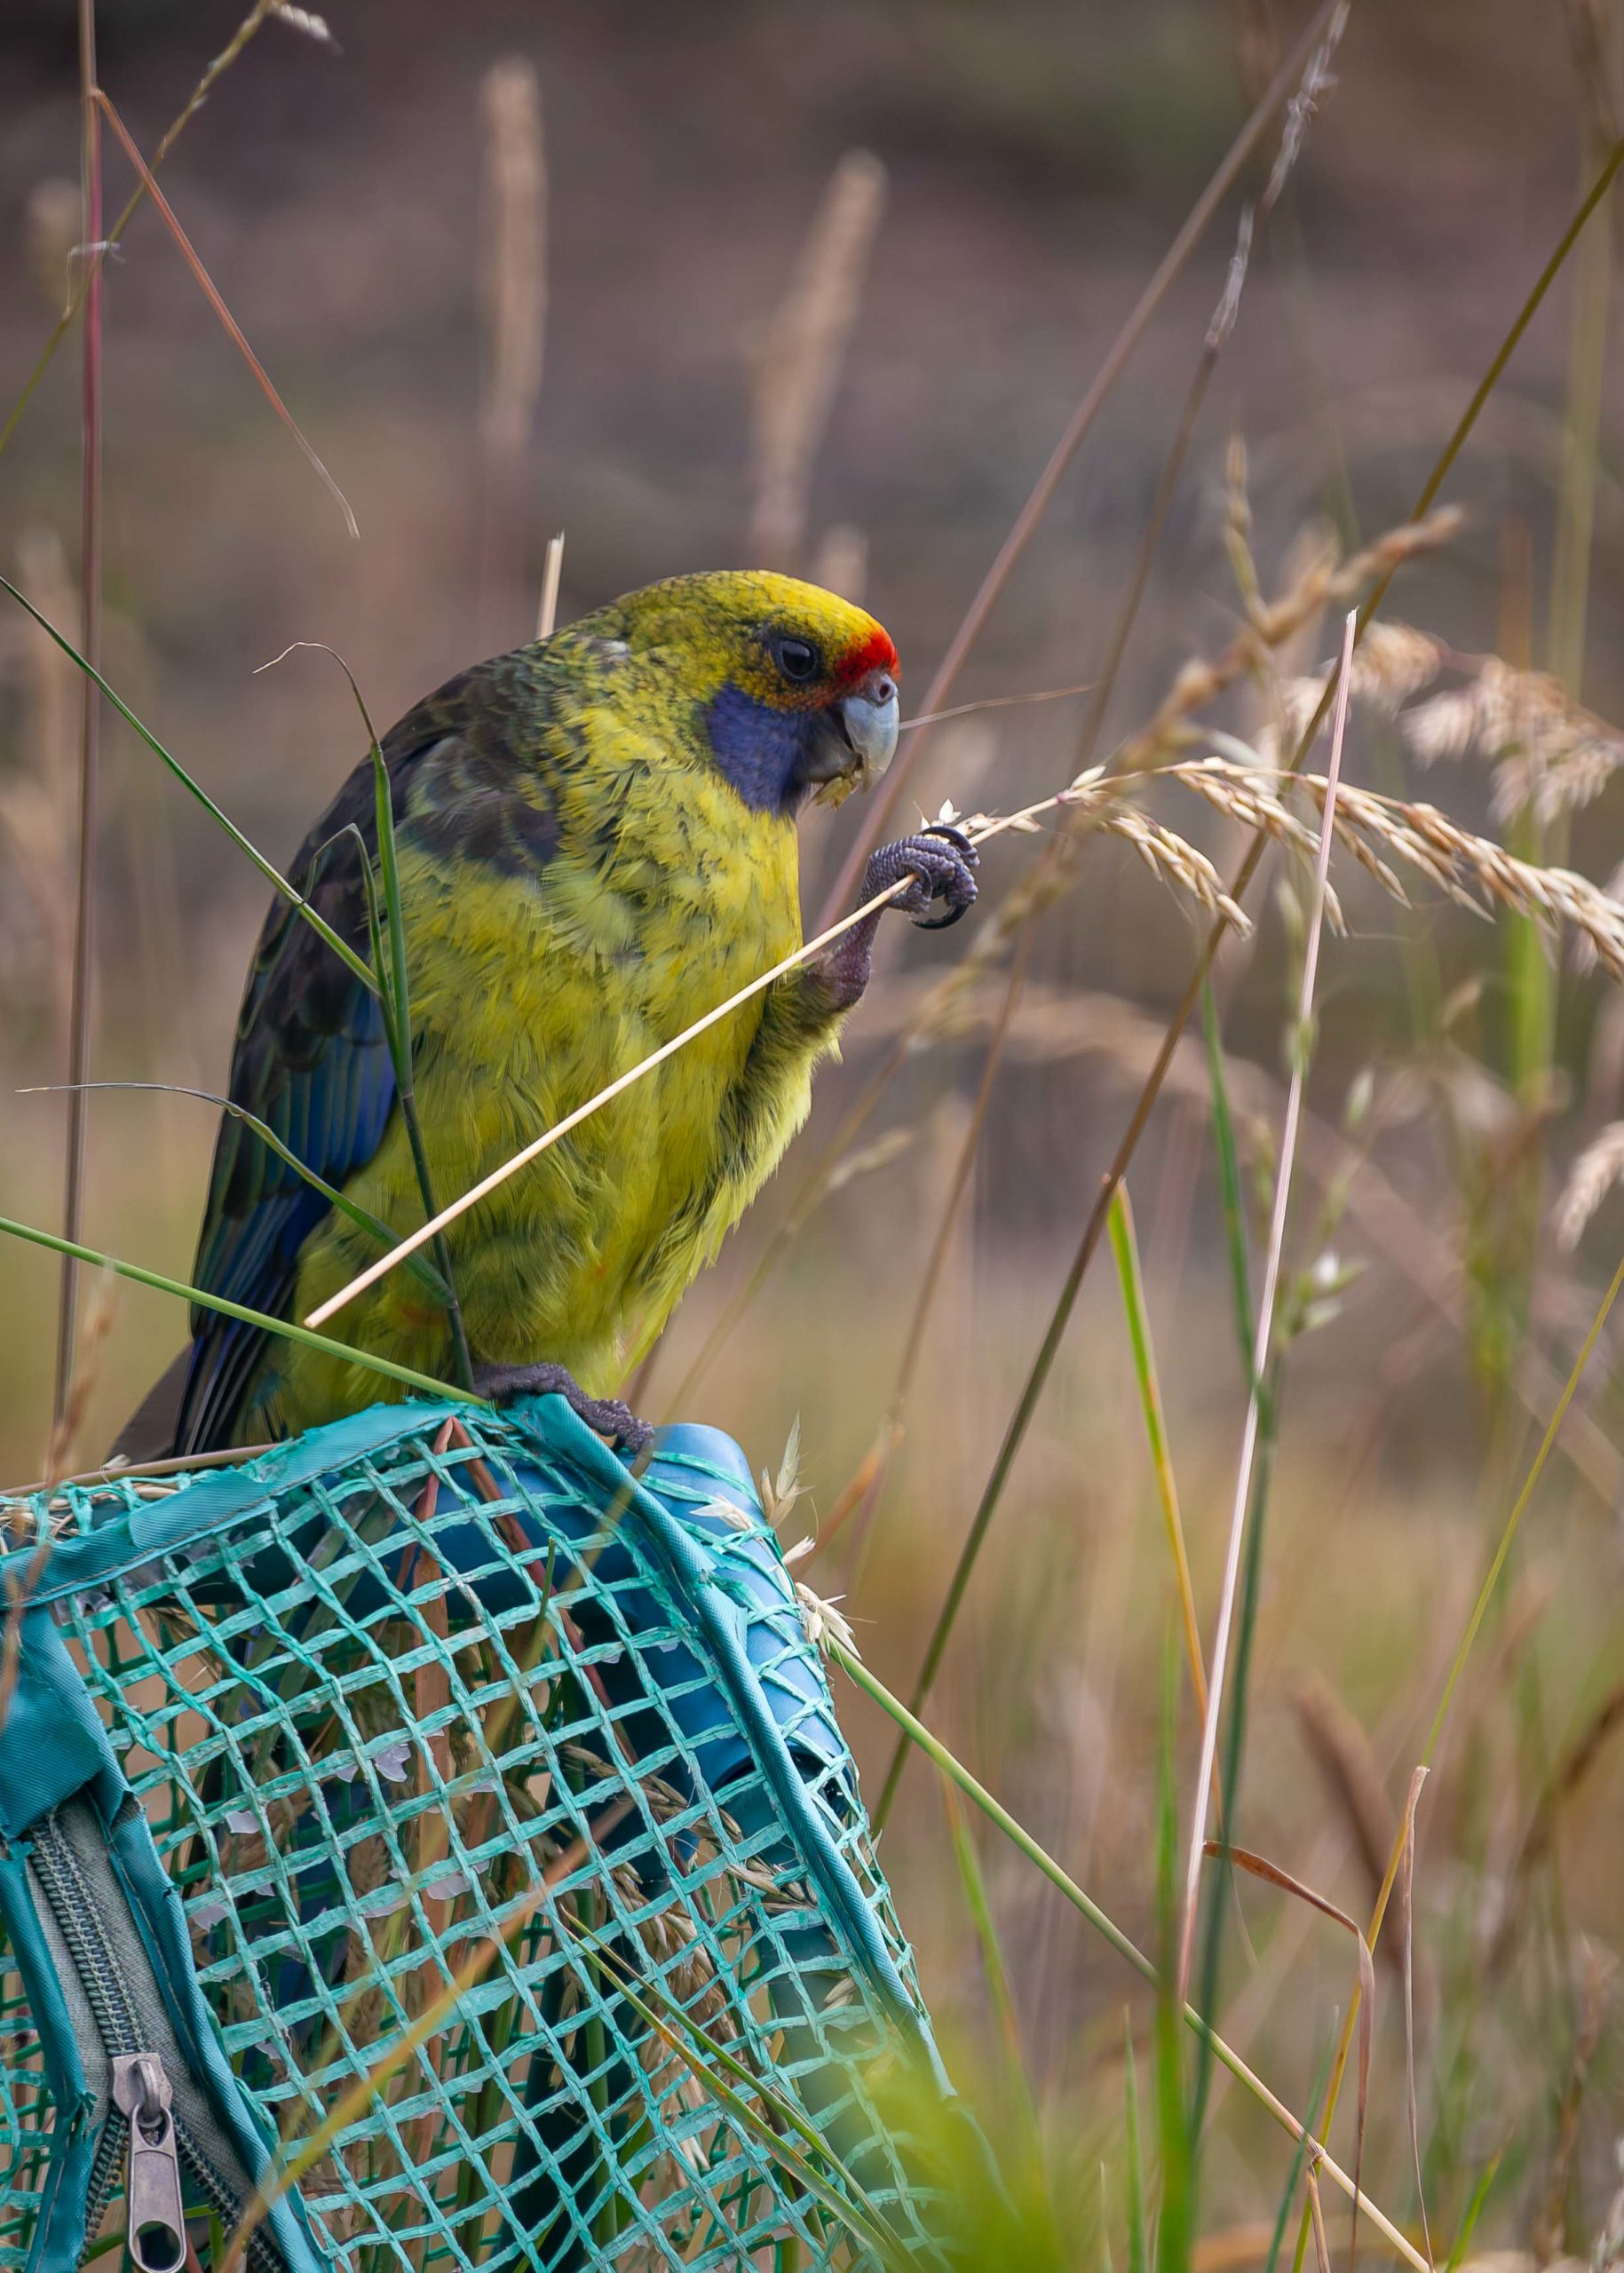 A predominantly green parrot with a red splash on its head sits on a green piece of mesh, holding a grass stalk in its claw